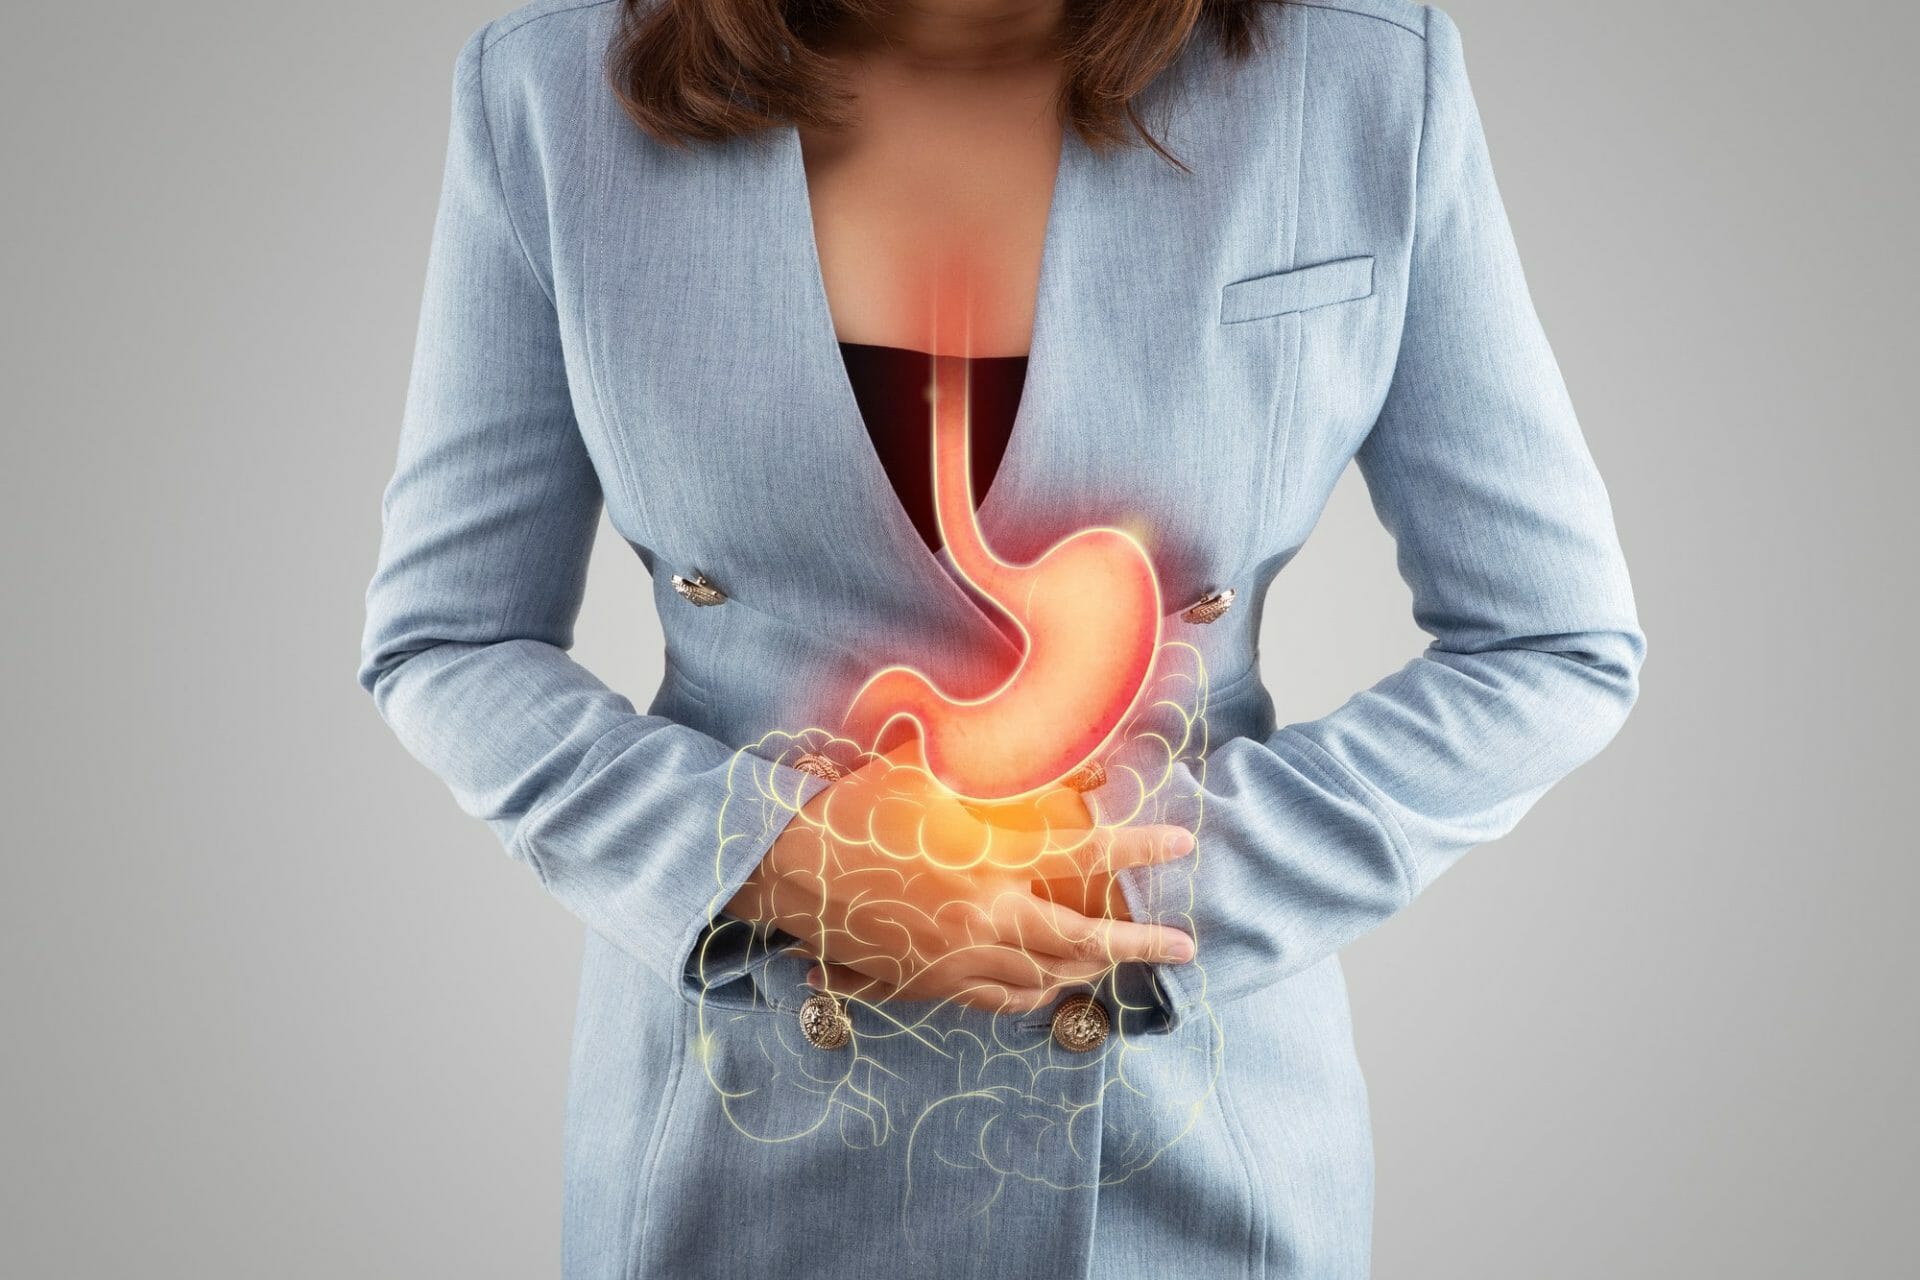 GERD : Causes, Symptoms, and Management